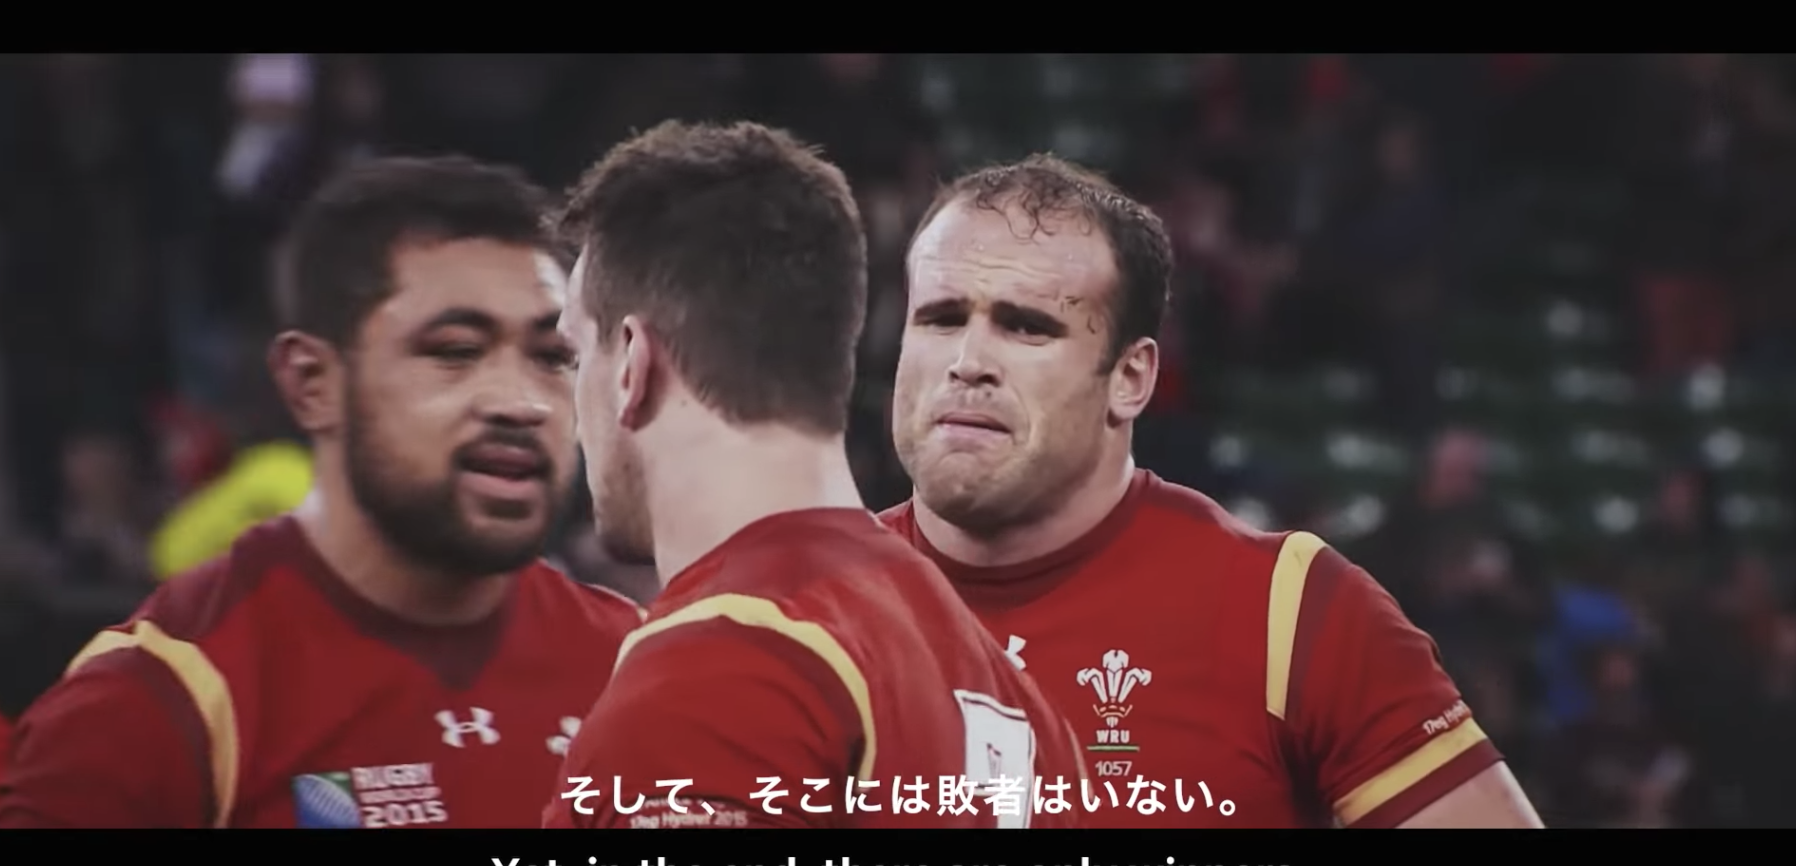 WATCH: A "World in Union" Rugby World Cup video has been made and it's pretty powerful